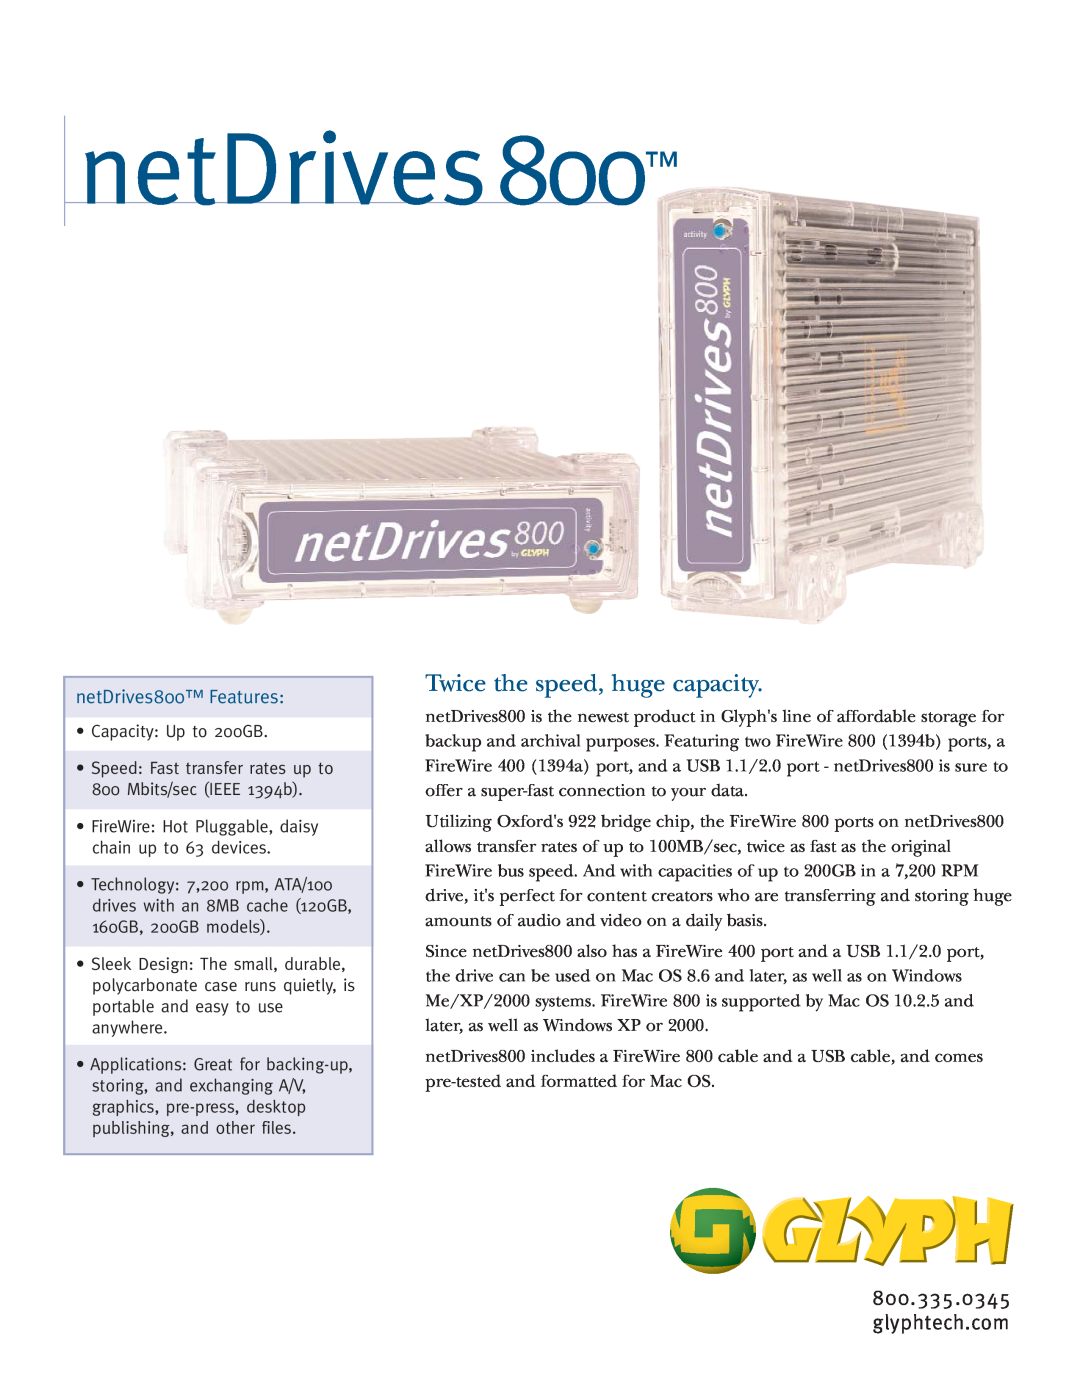 NetDrives manual glyphtech.com, Twice the speed, huge capacity, netDrives800 Features 